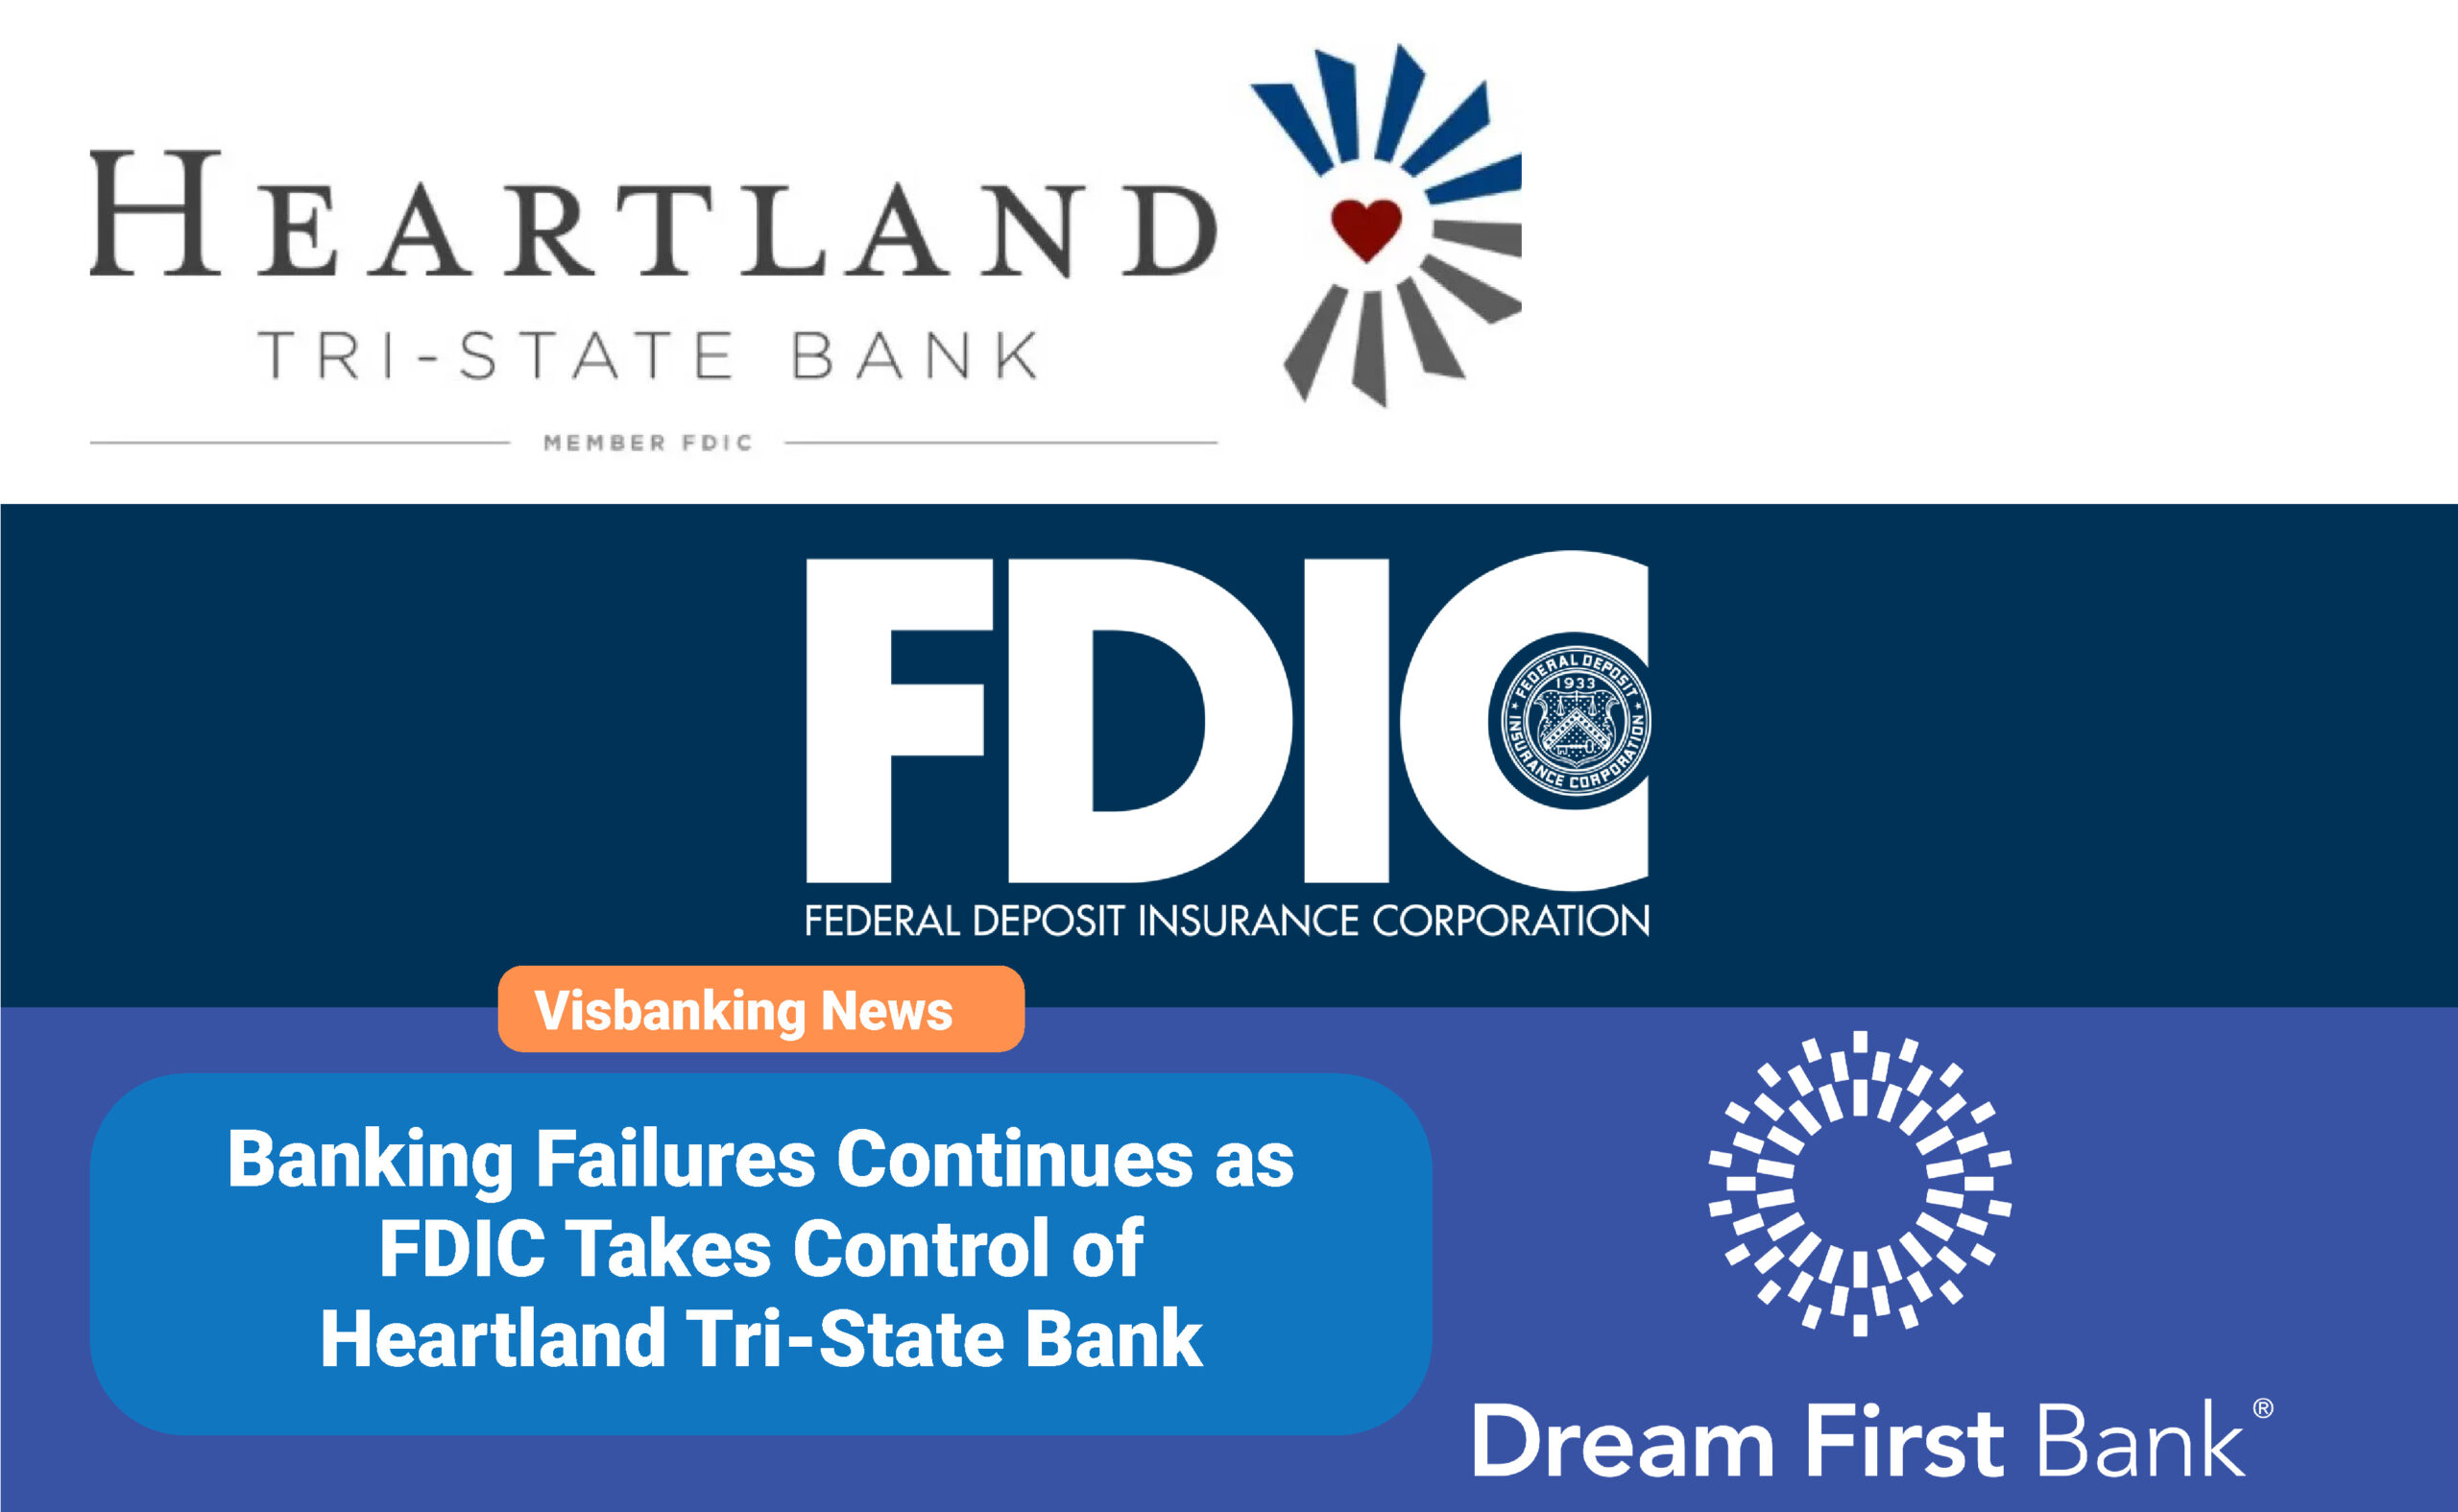 Banking Failures Continue as FDIC Takes Control of Heartland Tri-State Bank